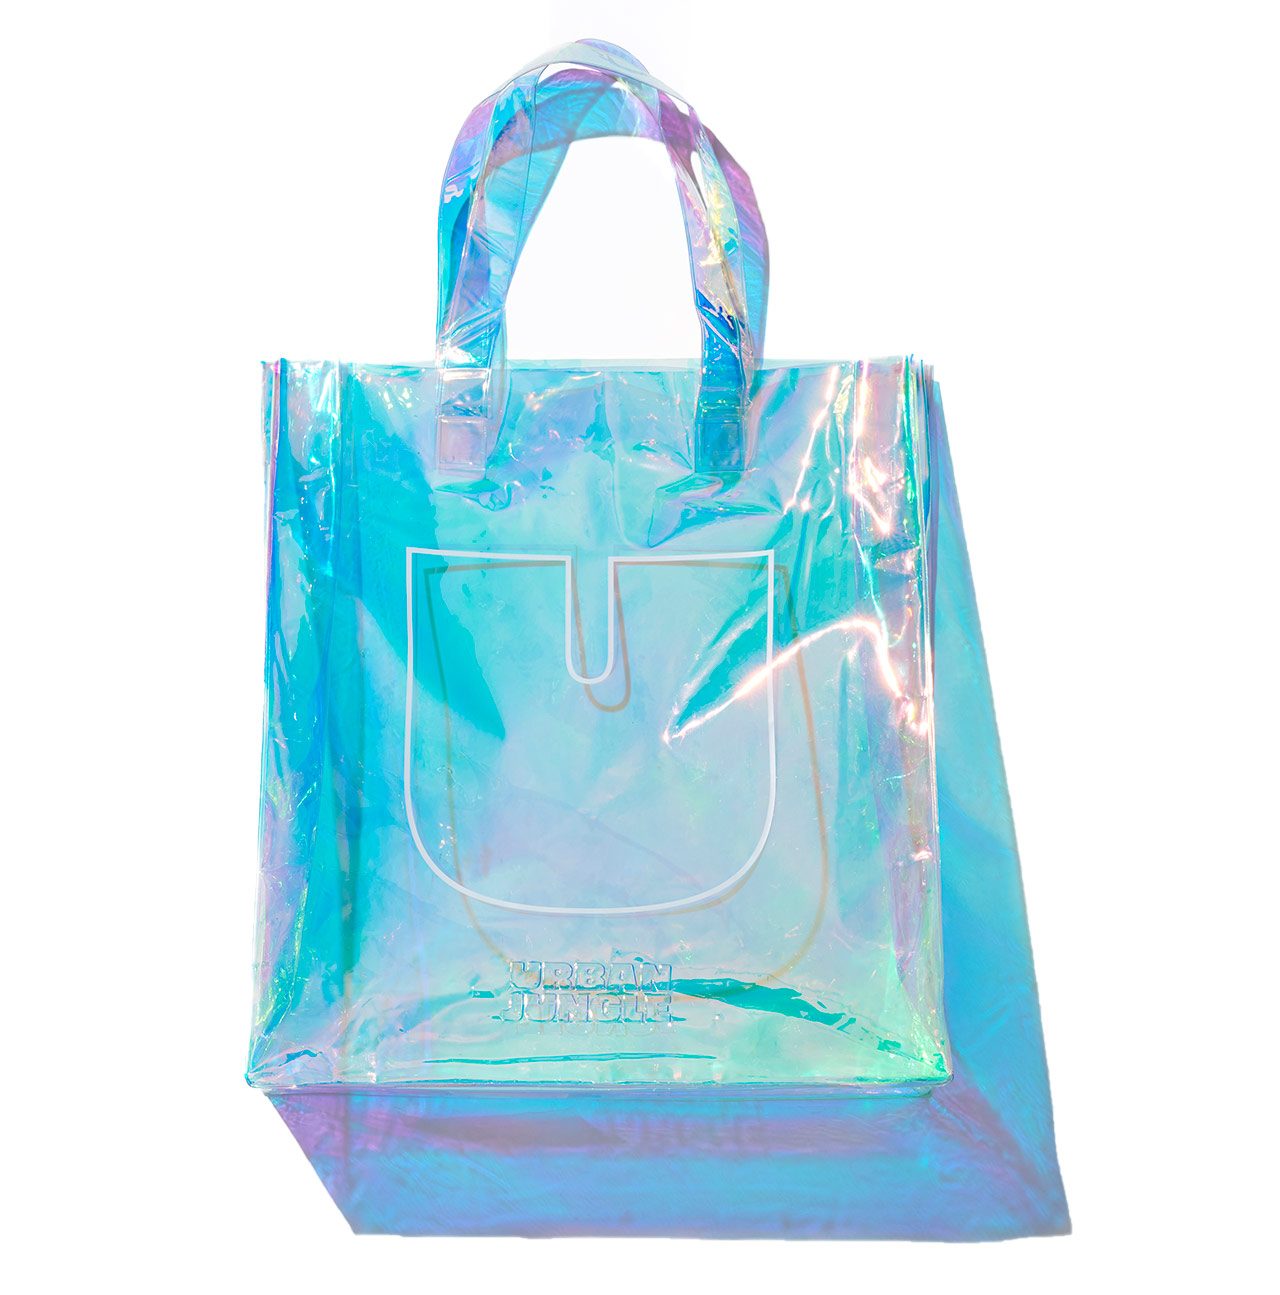 Holographic Iridescent Clear Tote Bag for Stadium Large Fashion Rainbow  PVC Handbag Purses for Beach Sports Work Travel Party  Amazonin Bags  Wallets and Luggage